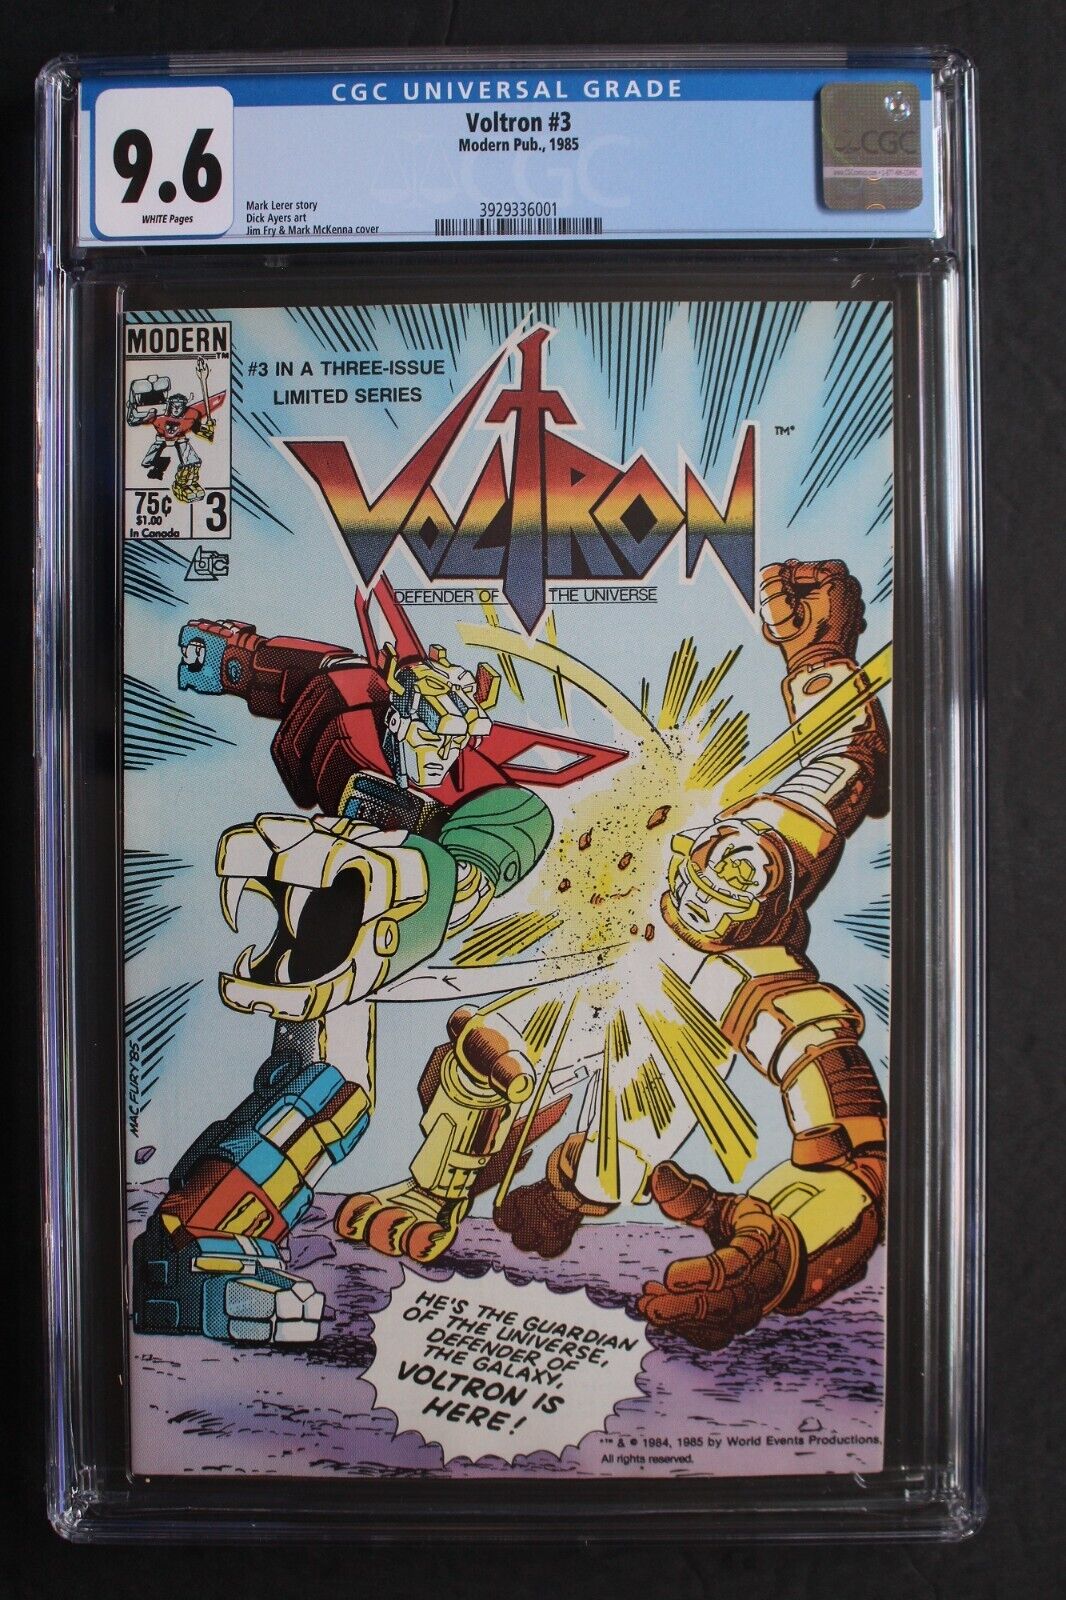 VOLTRON Defender of the Universe #3 Modern Comics 1985 Robot Animated TV CGC 9.6